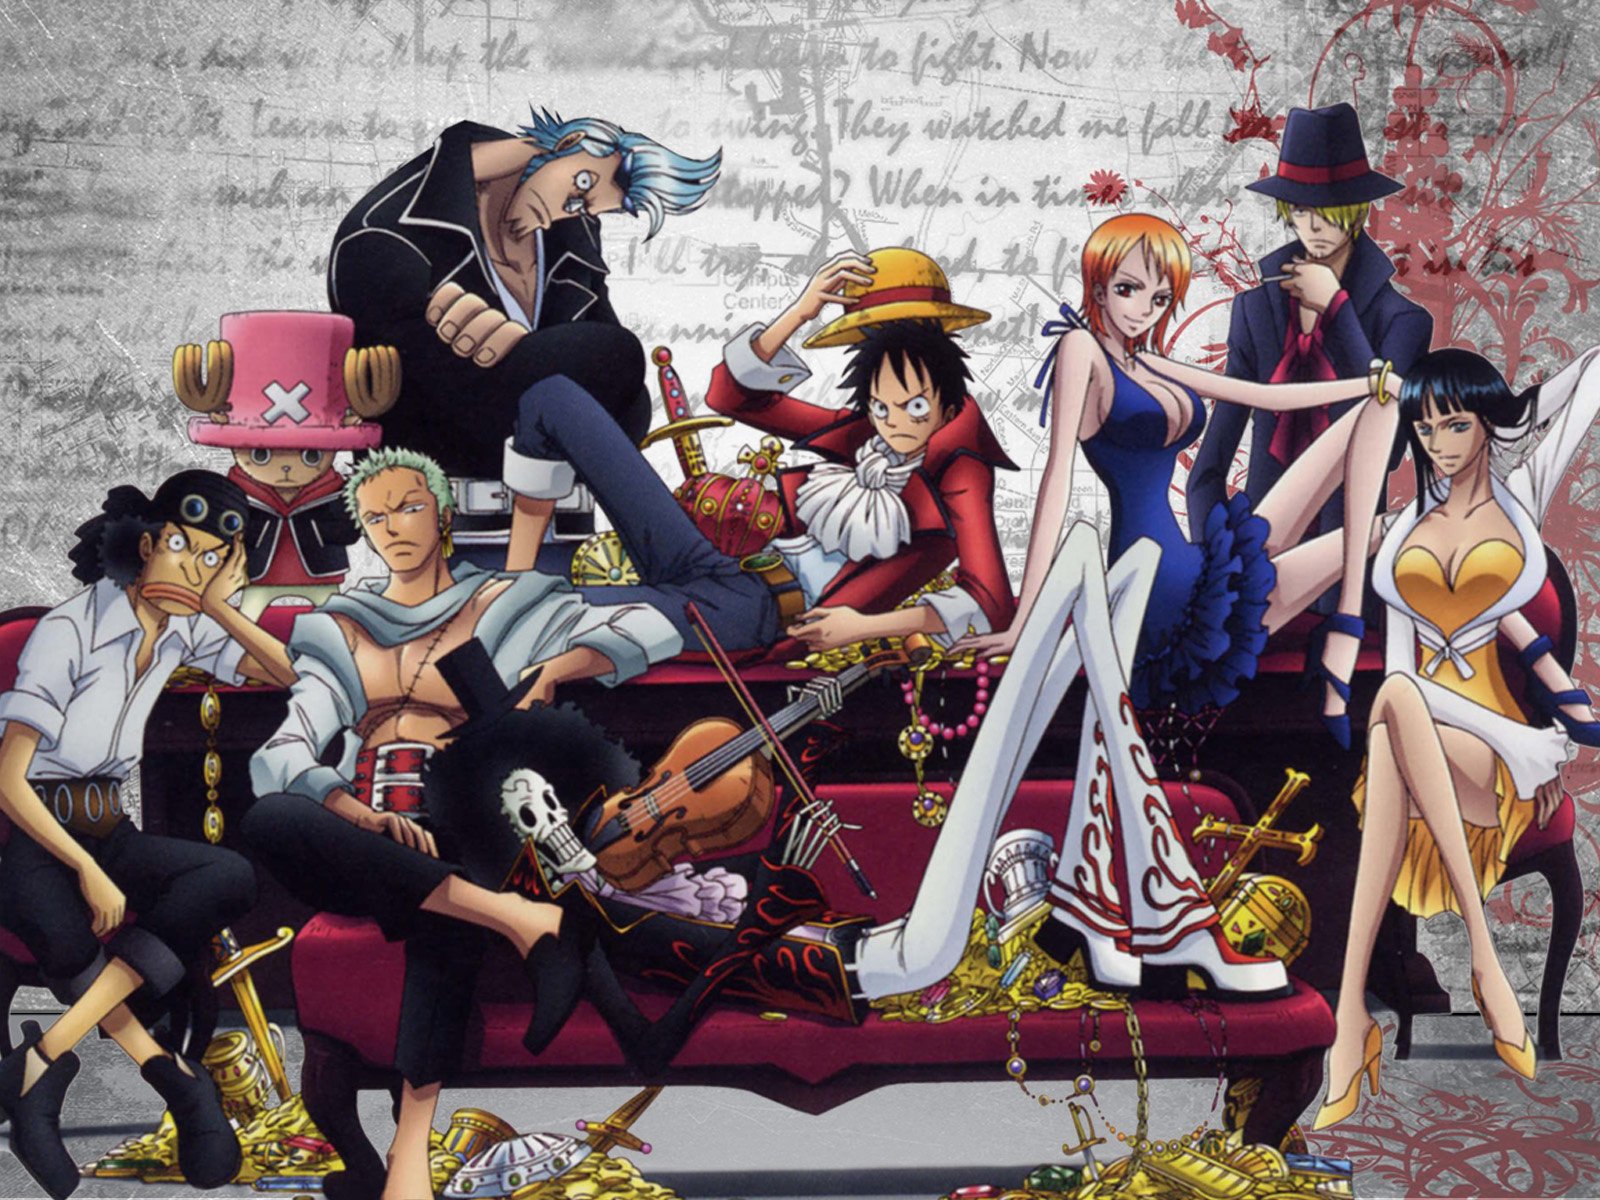 Straw Hats One Piece Wallpaper 1920x1080 4k Gif - IMAGESEE